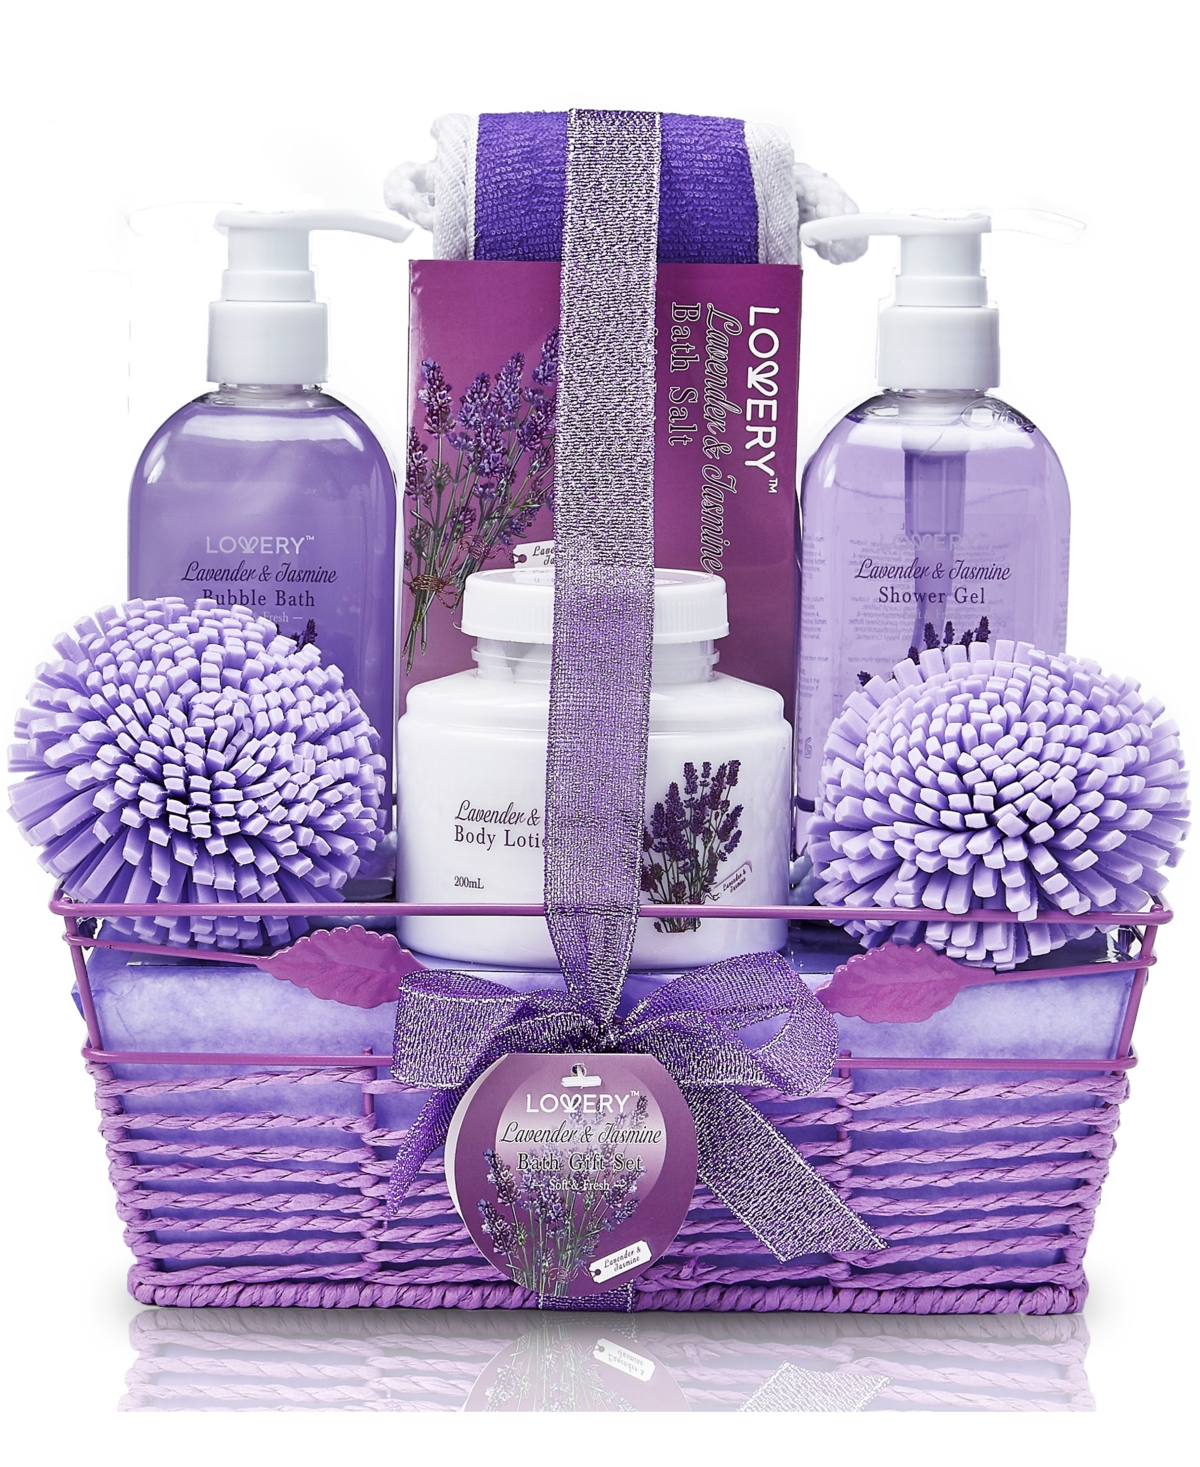 Lovery Home Spa Body Care Gift Set in Lavender Jasmine, 8 Piece